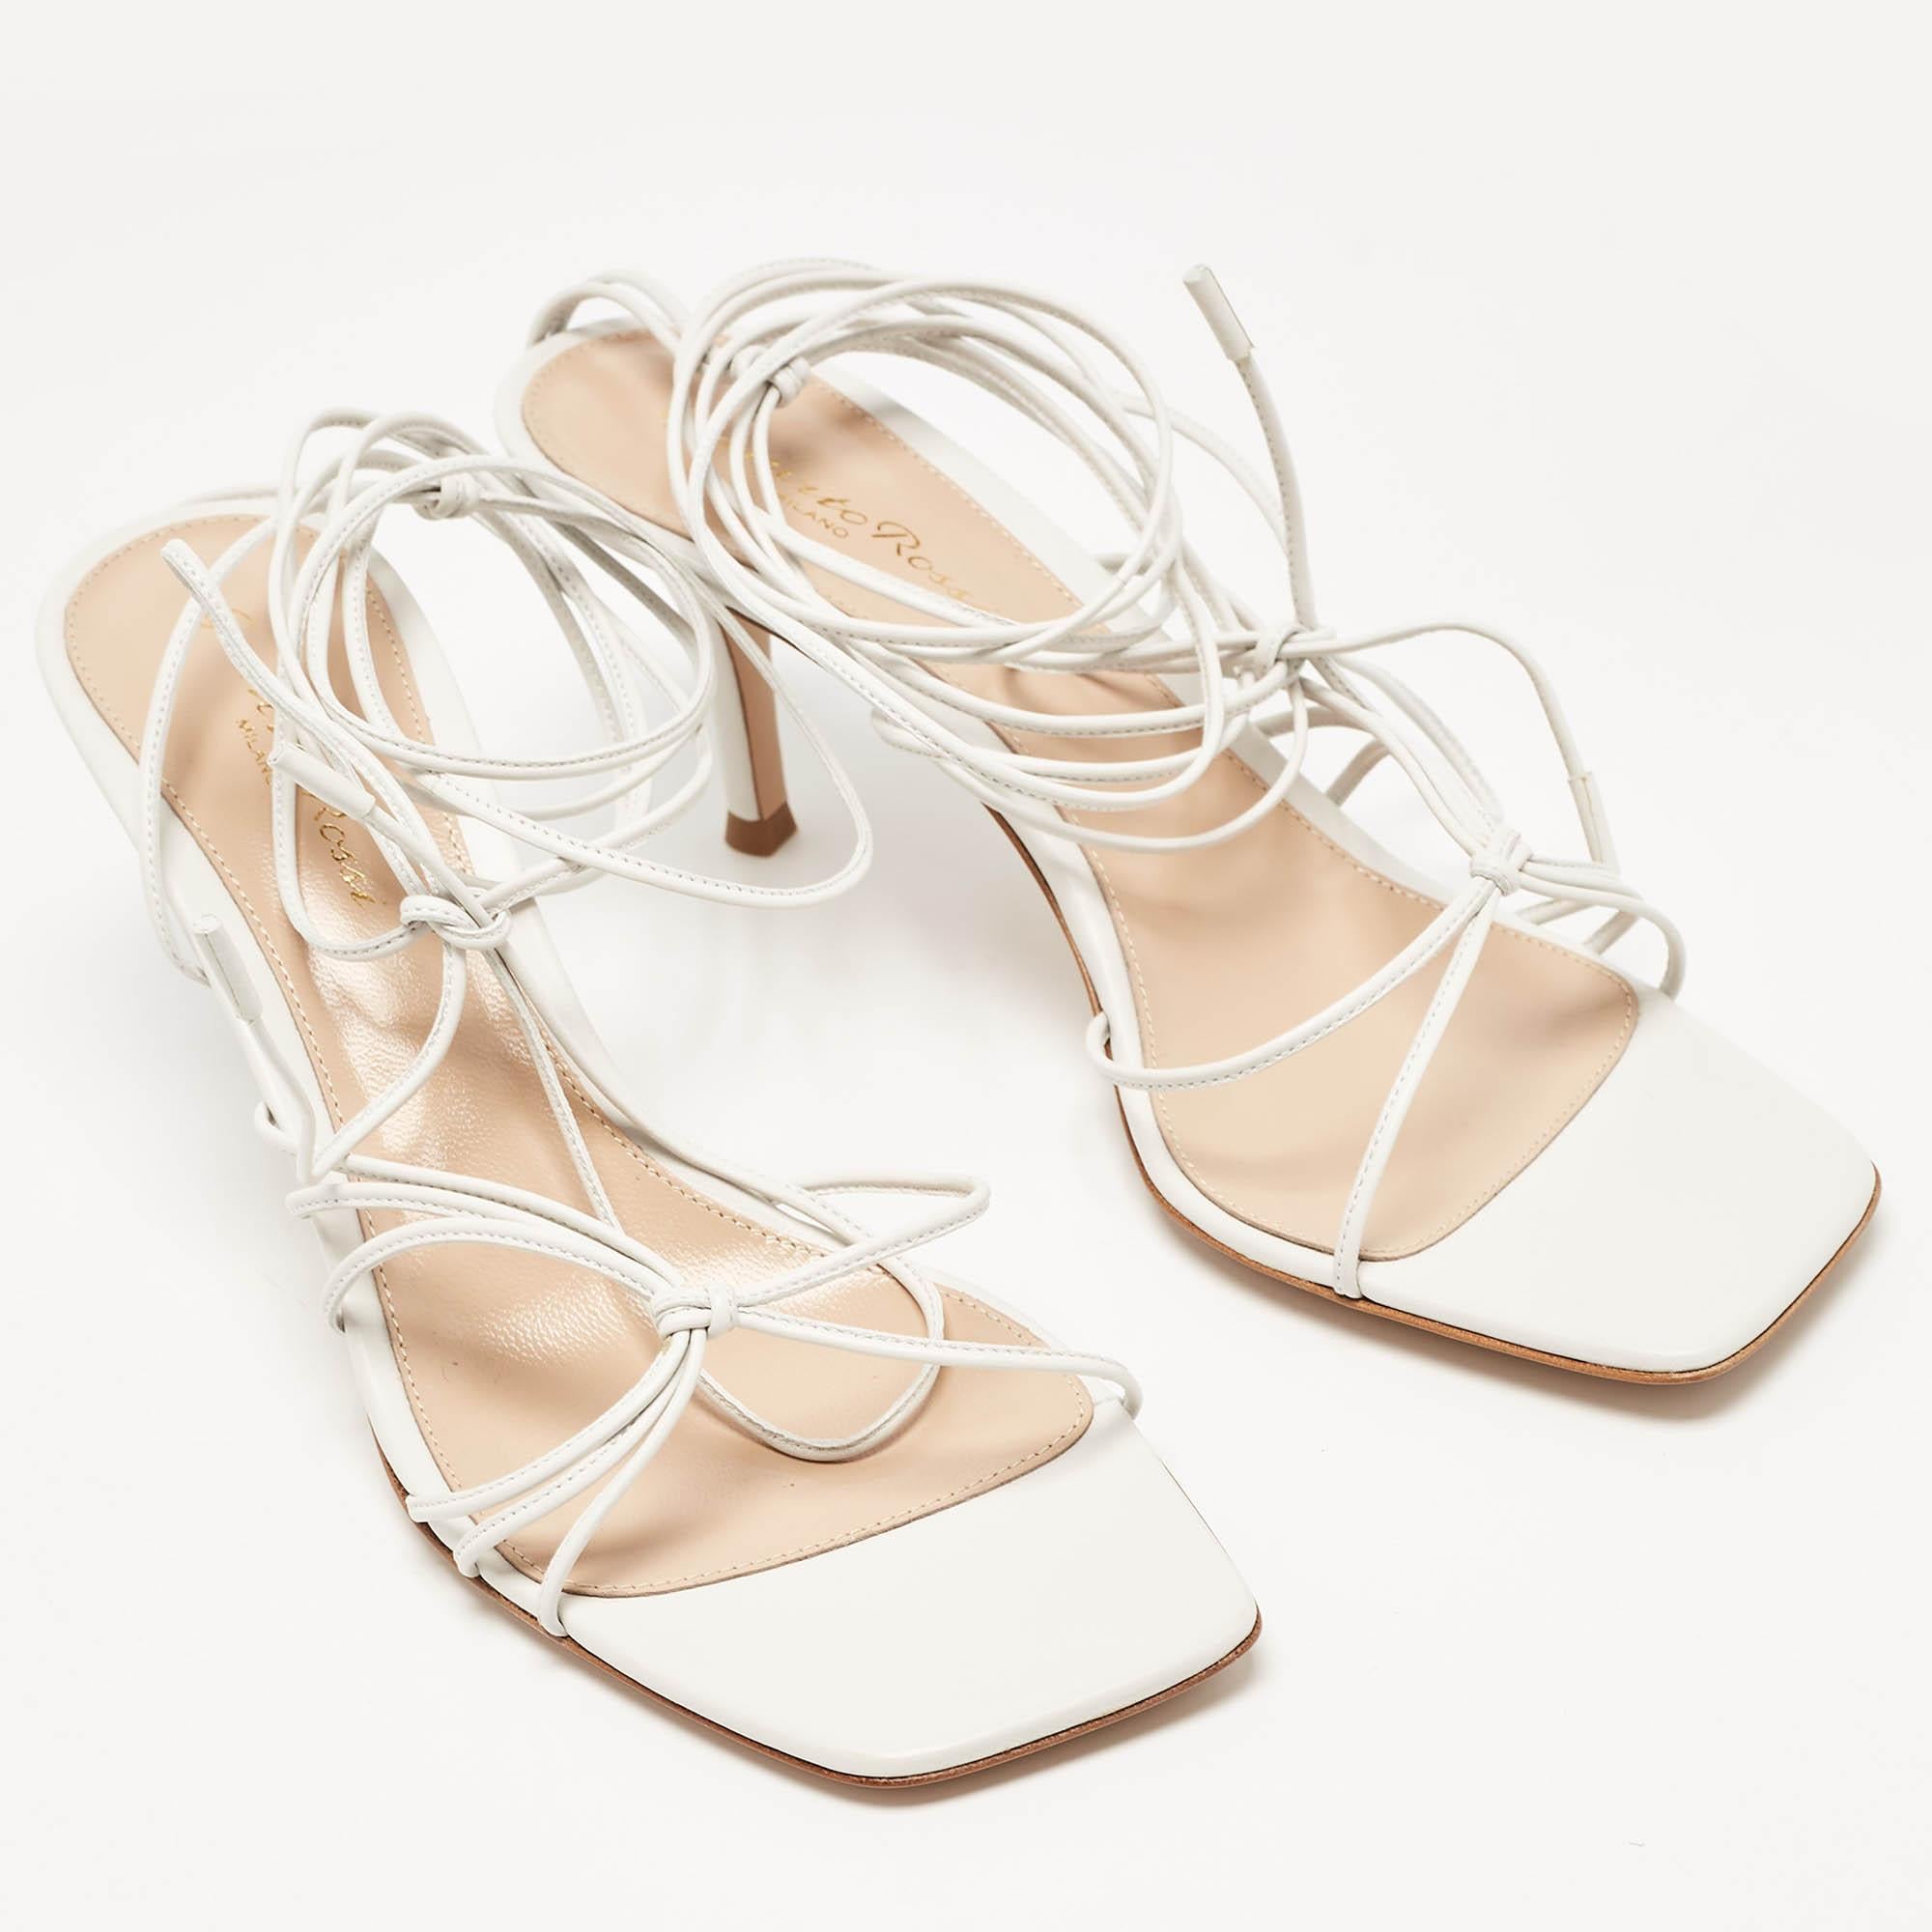 Gianvito Rossi White Leather Sylvie Sandals Size 38.5 For Sale 1